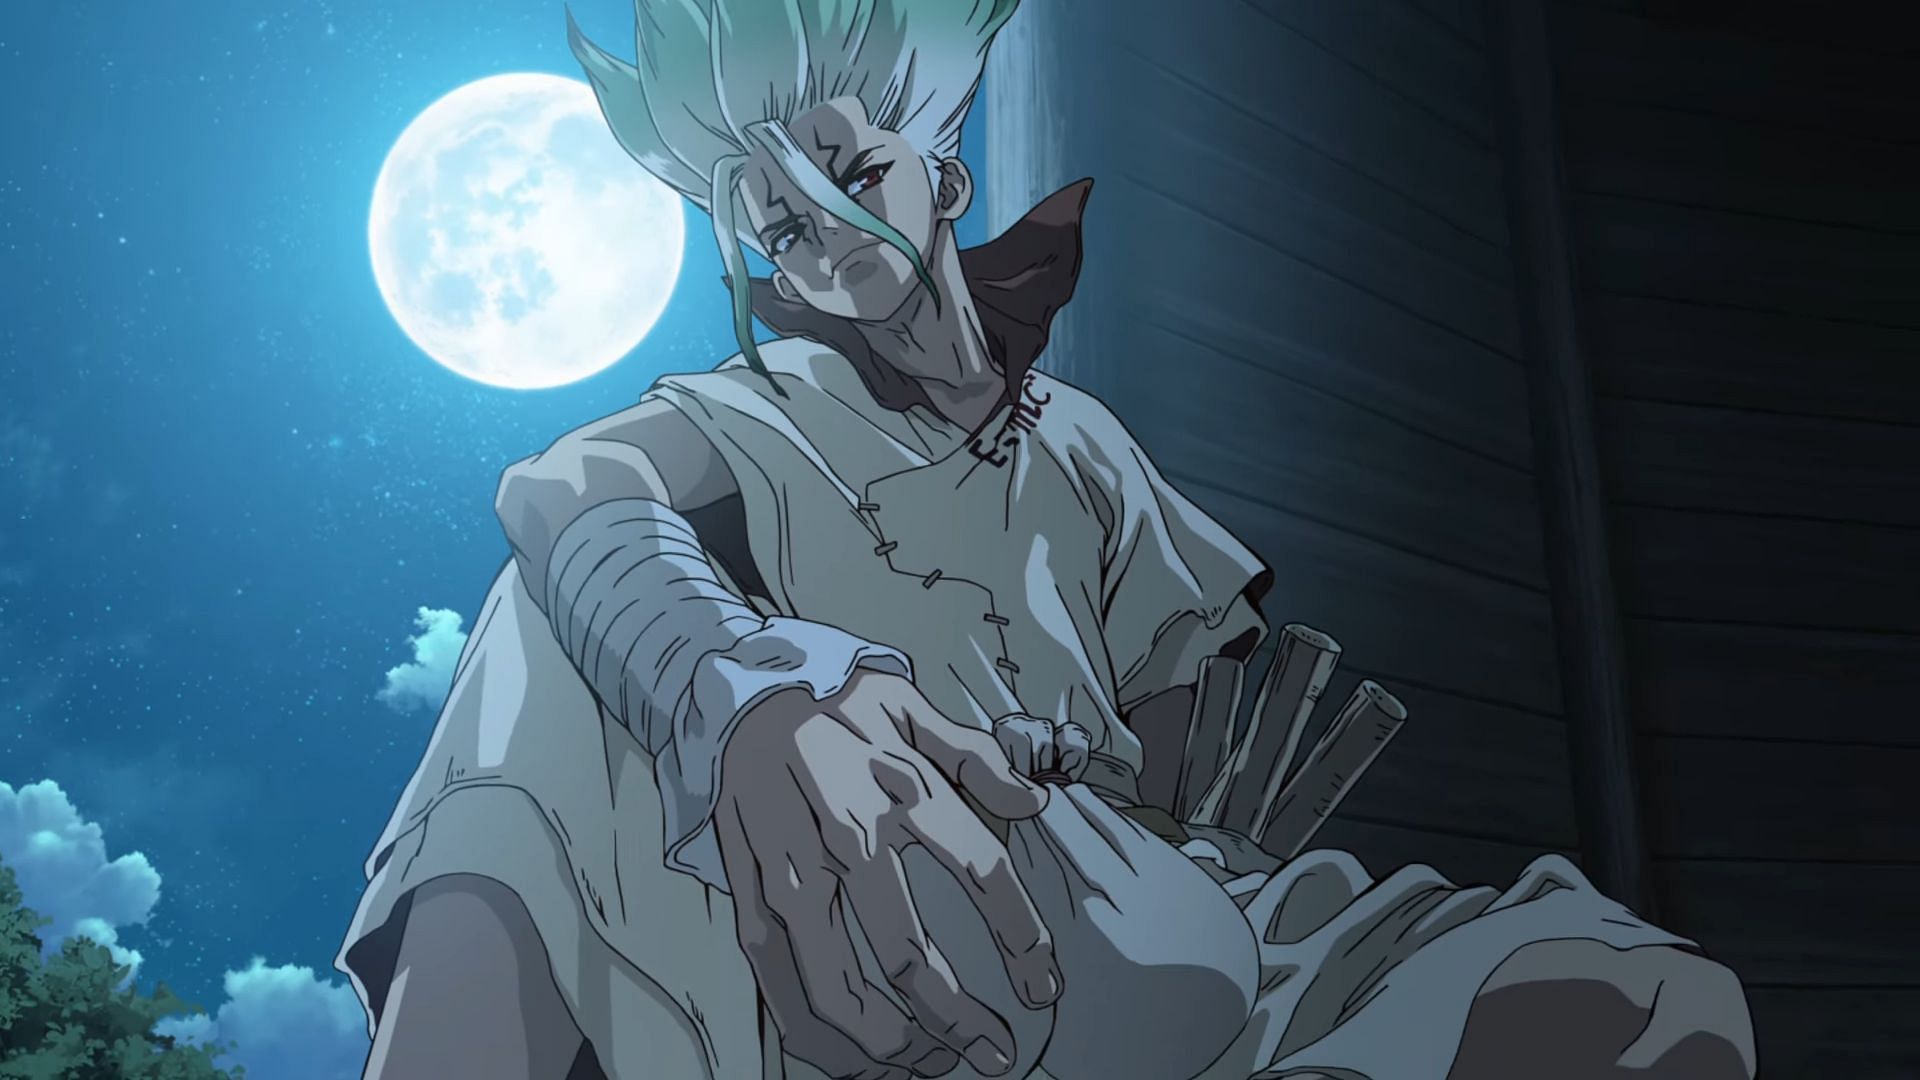 What time is Dr. Stone Season 3 out on Crunchyroll? - Dexerto